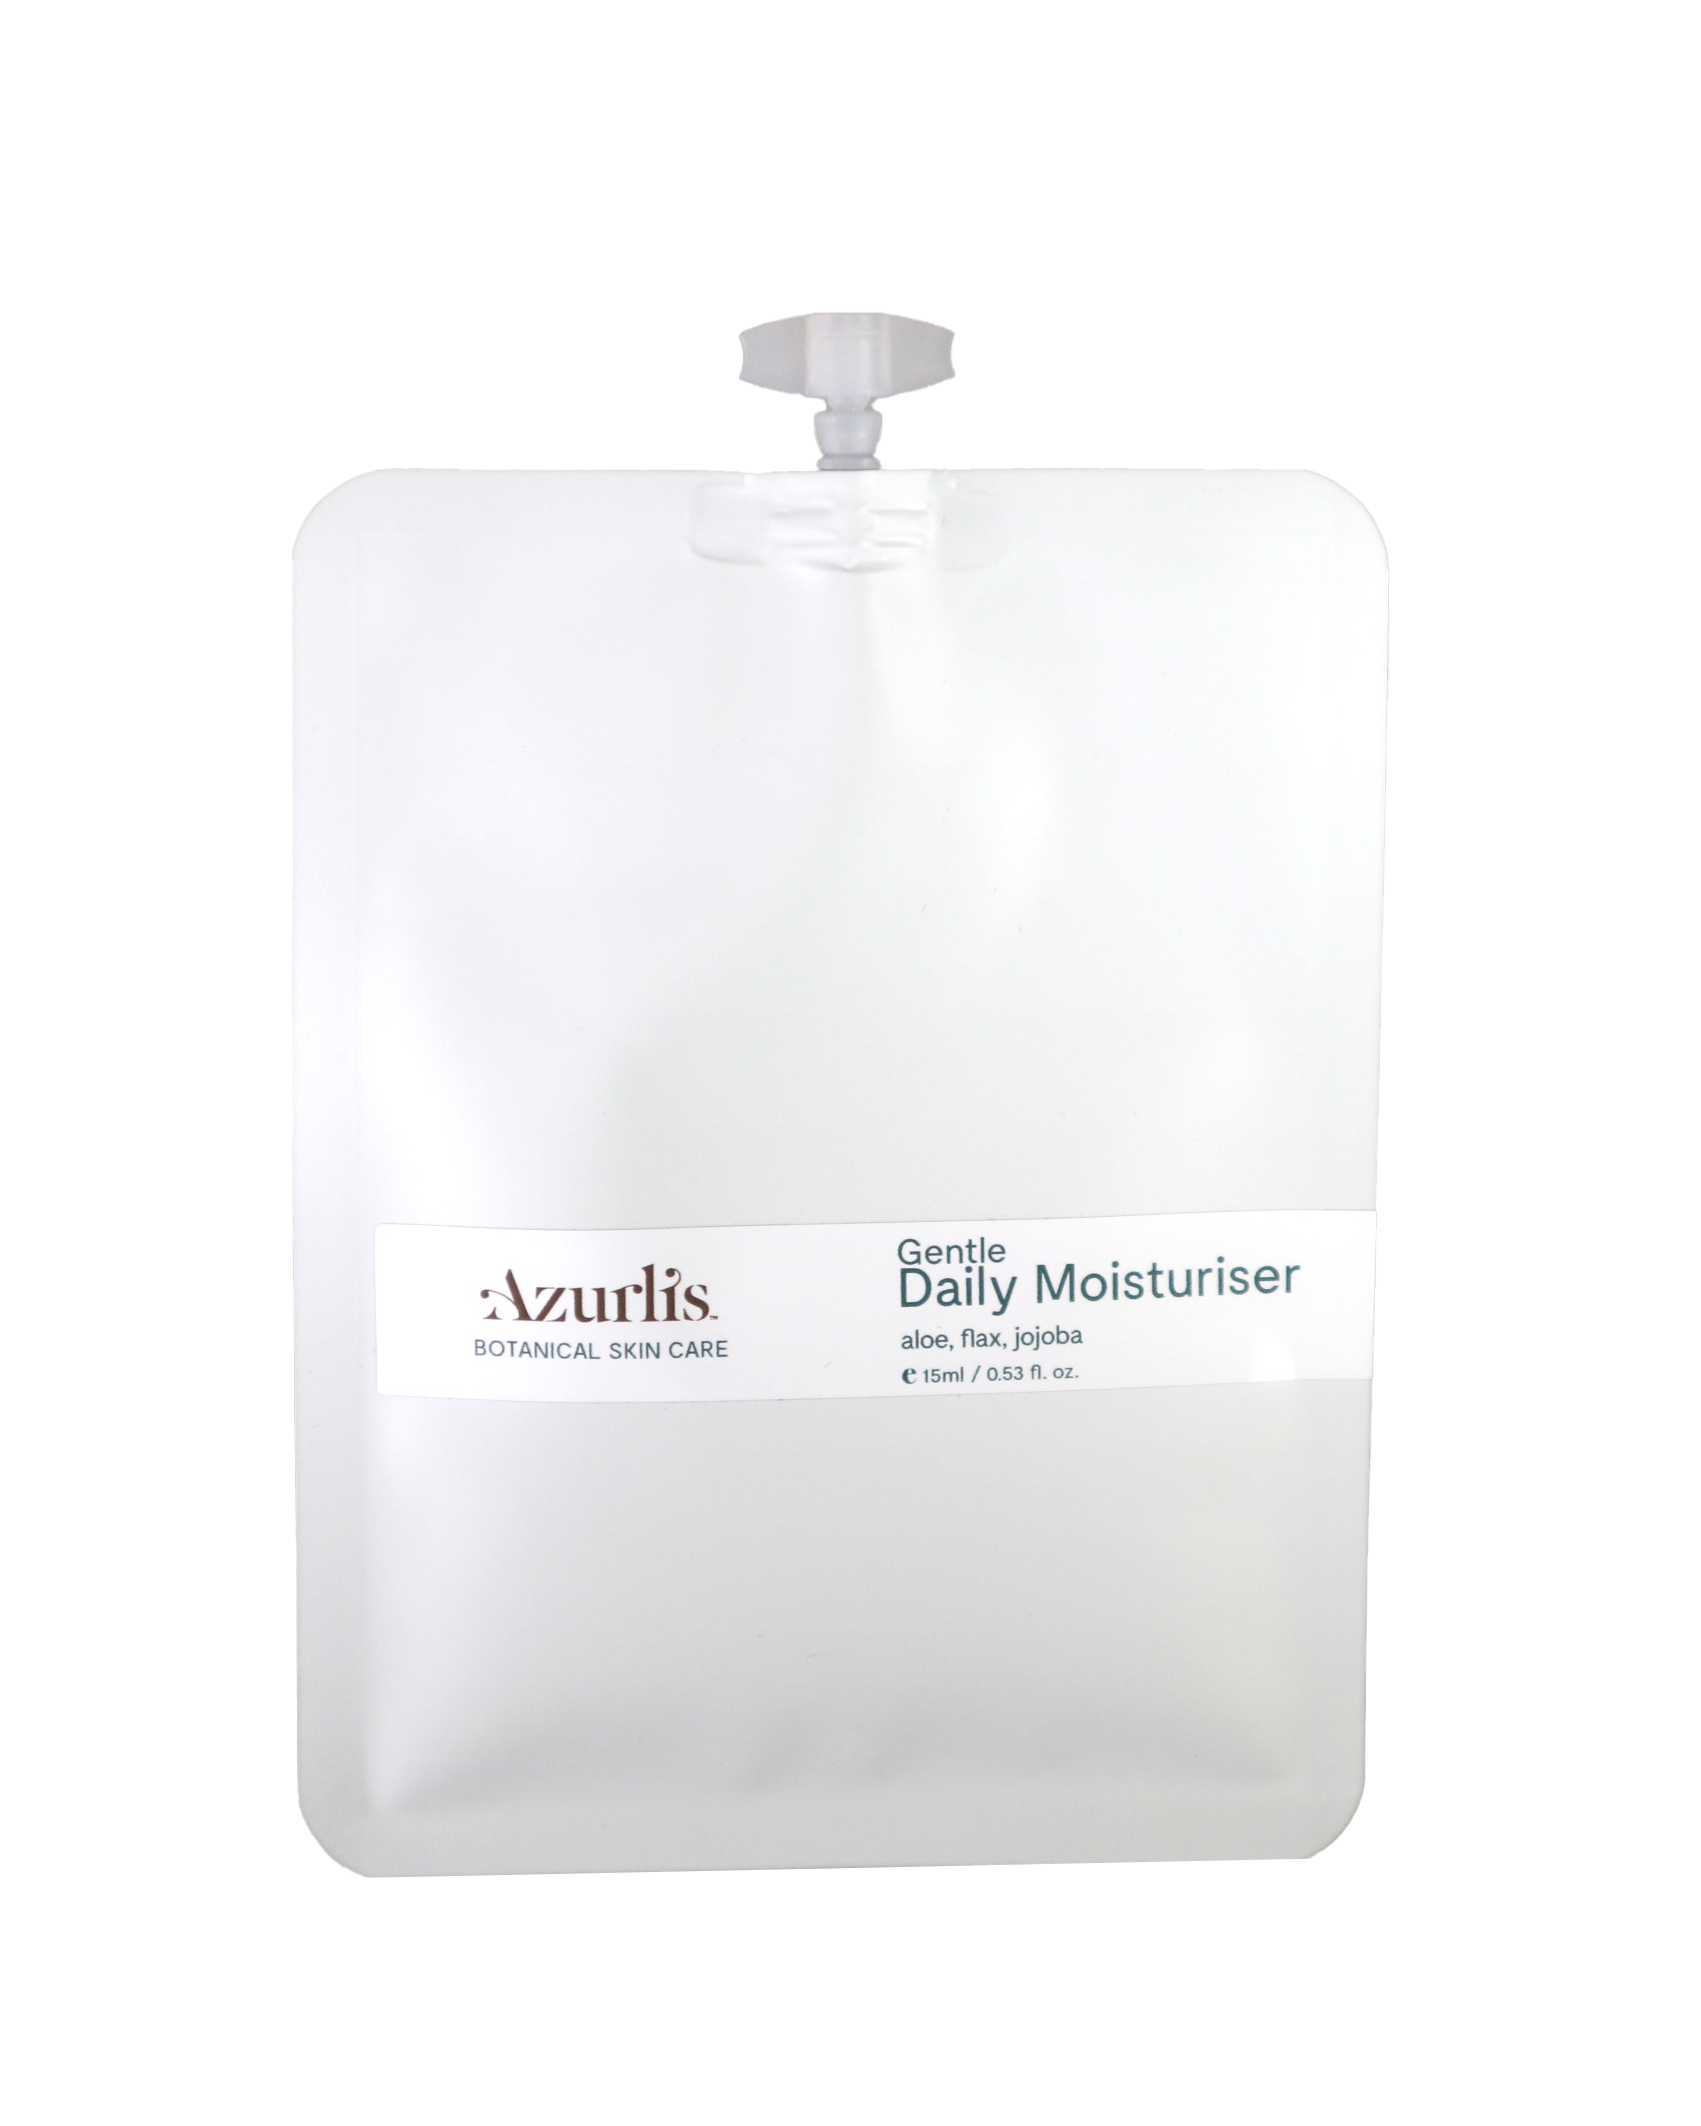 Azurlis™ Gentle Daily Moisturiser 50ml is formulated to hydrate and nourish sensitive and fragile skin, all day long. Equally great on all skin types, for women or men.